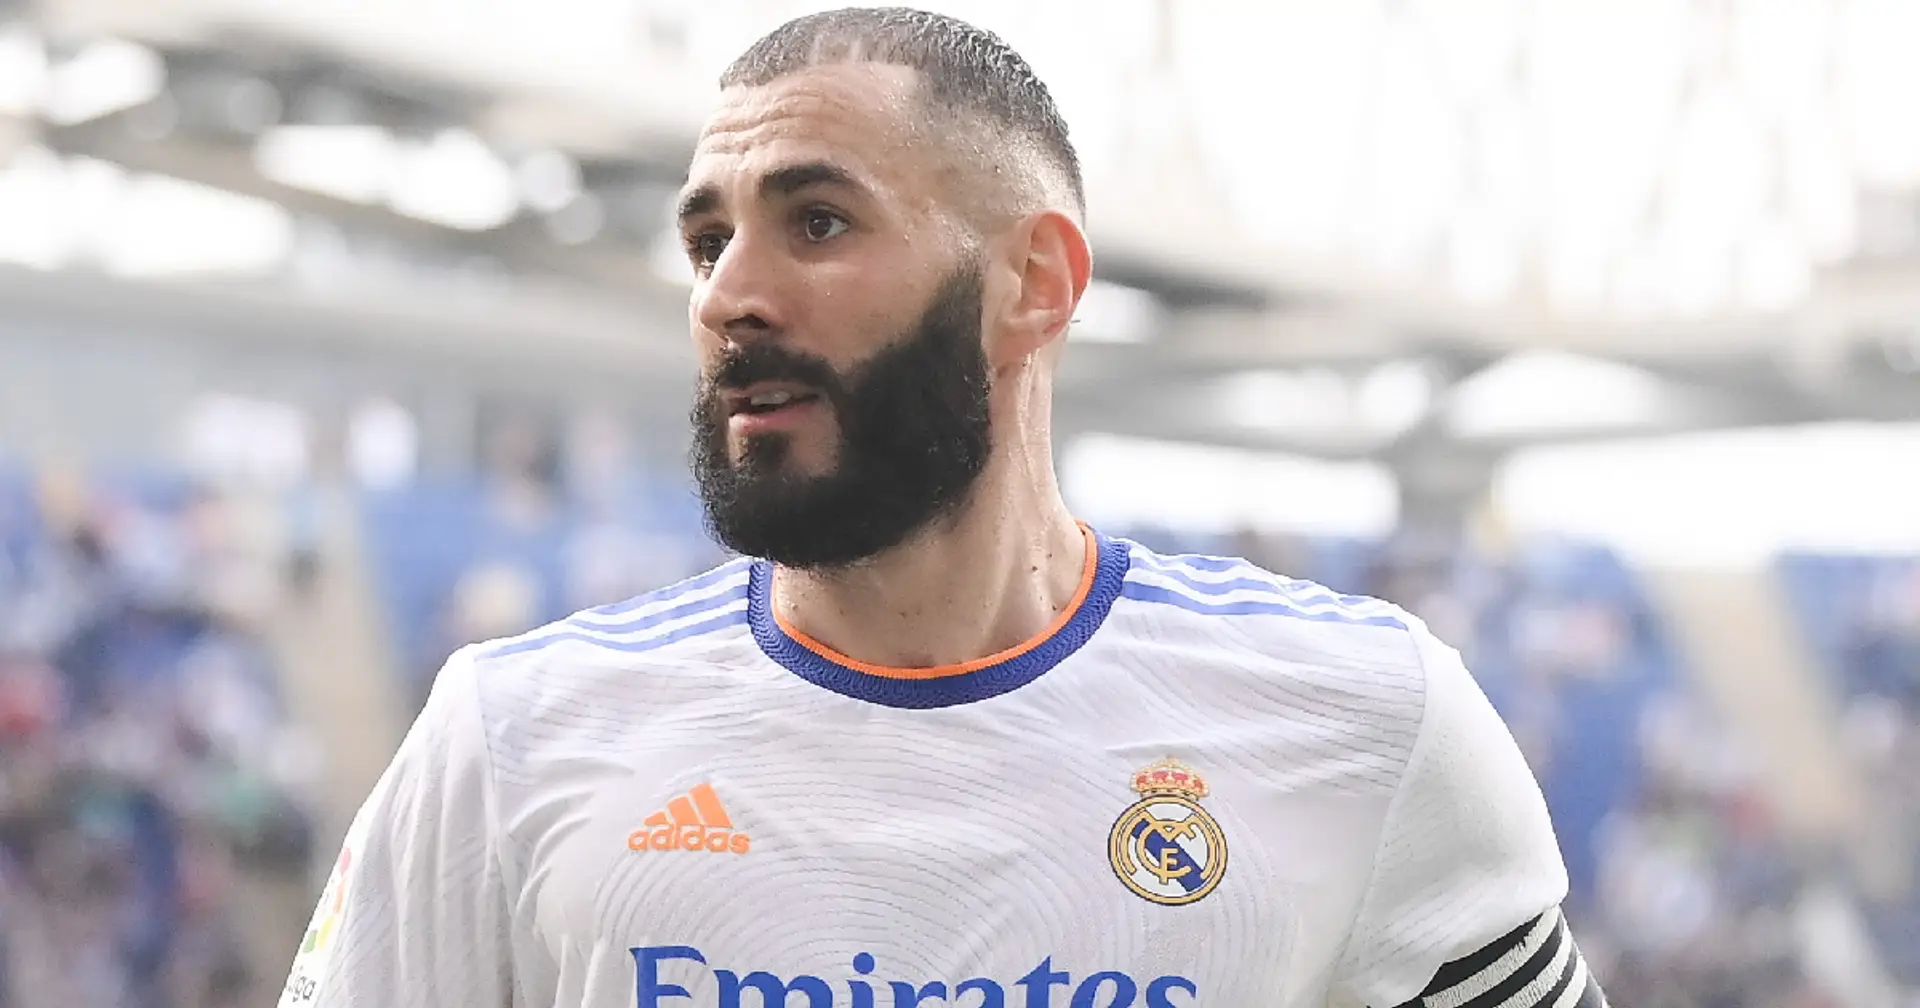 Revealed: date when Benzema will be sentenced or acquitted for blackmail case